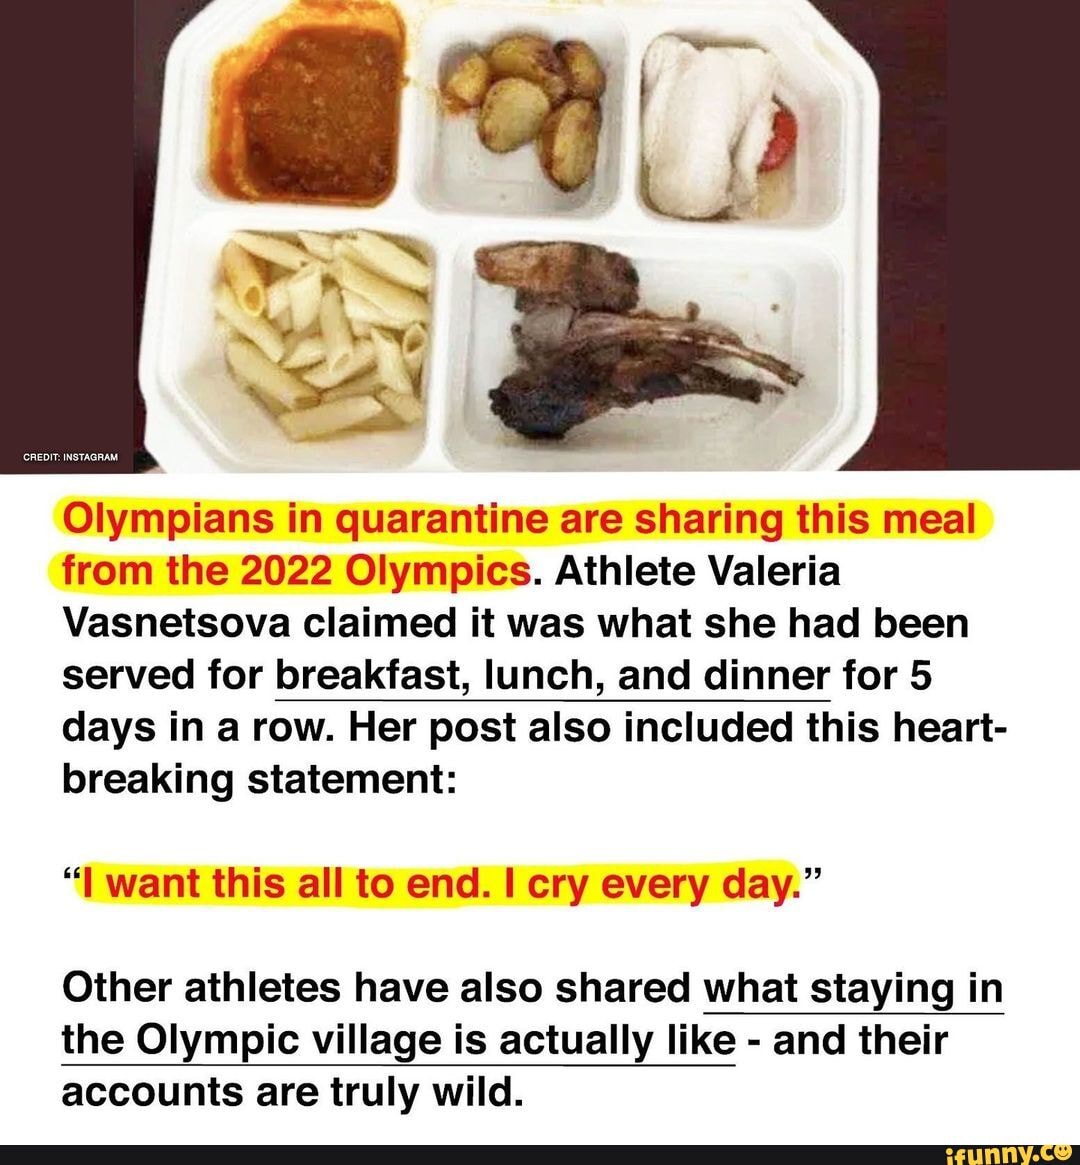 Olympians in quarantine are sharing this meal from the 2022 Olympics